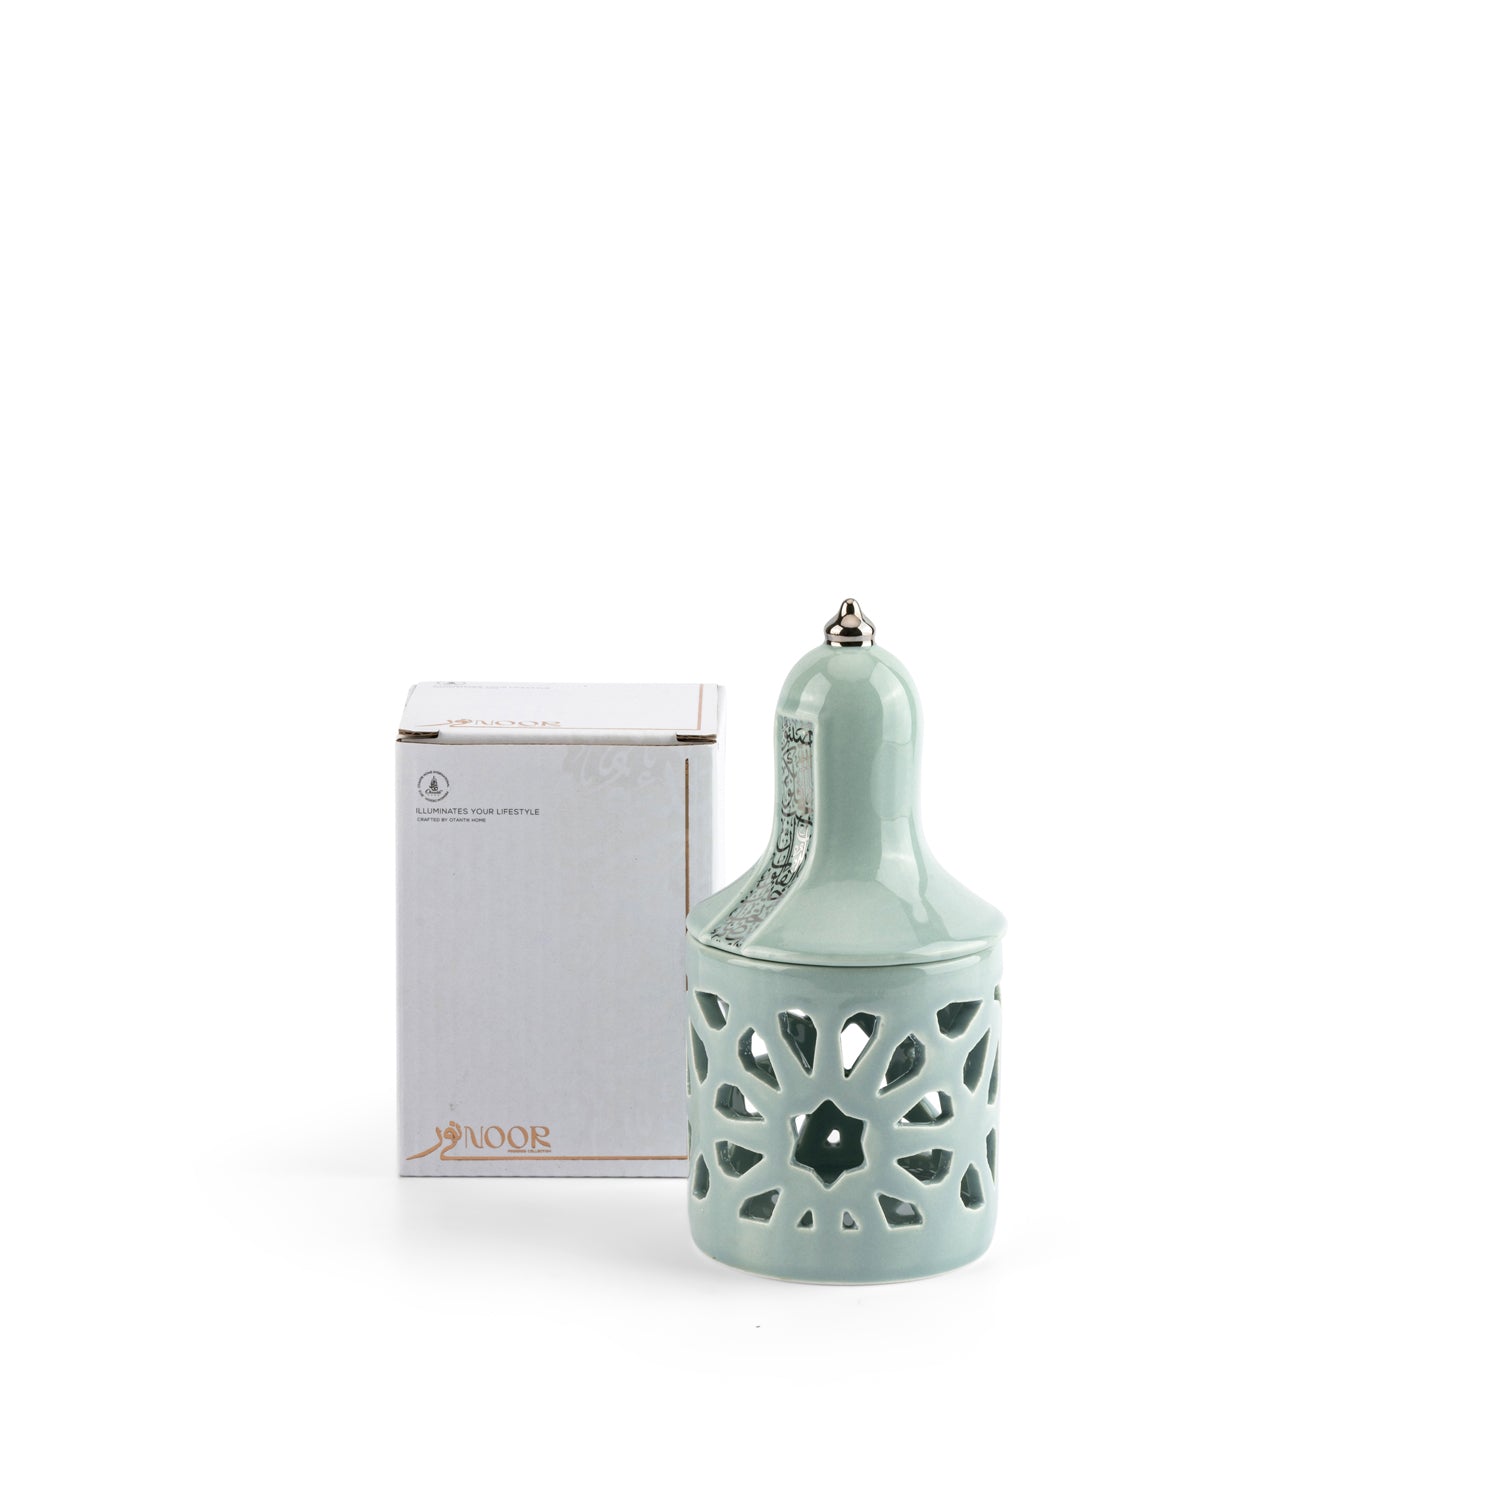 Luxury Noor - Small Lantern Candle Holder - Blue & Silver